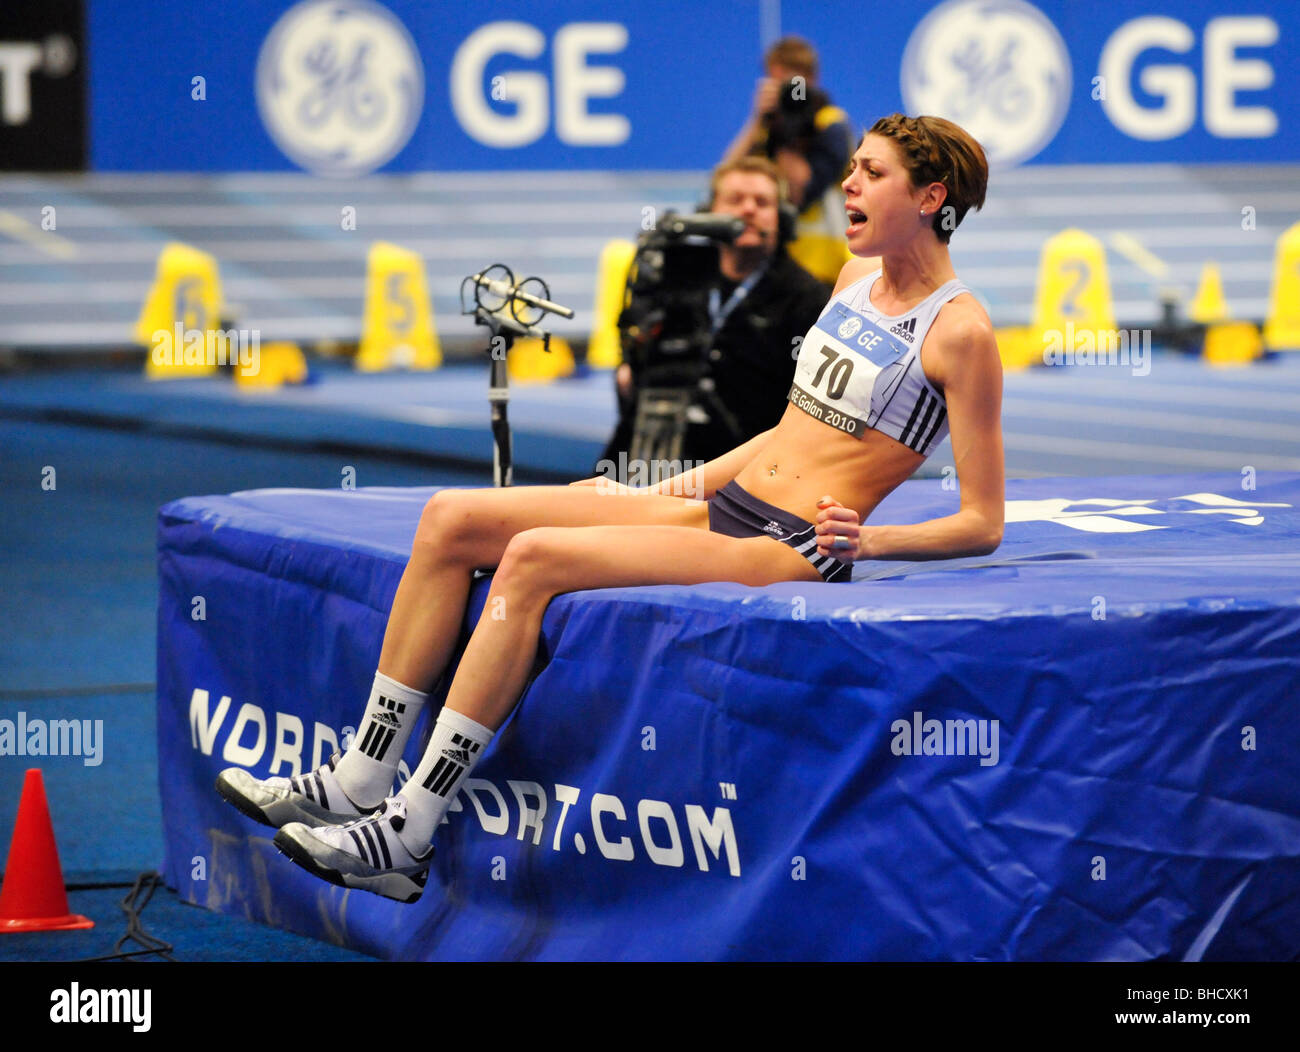 A disappointed Blanka Vlasic Croatia after failing to clear 2.04 meters in the womans high jump in the GE Games in Stockholm Stock Photo